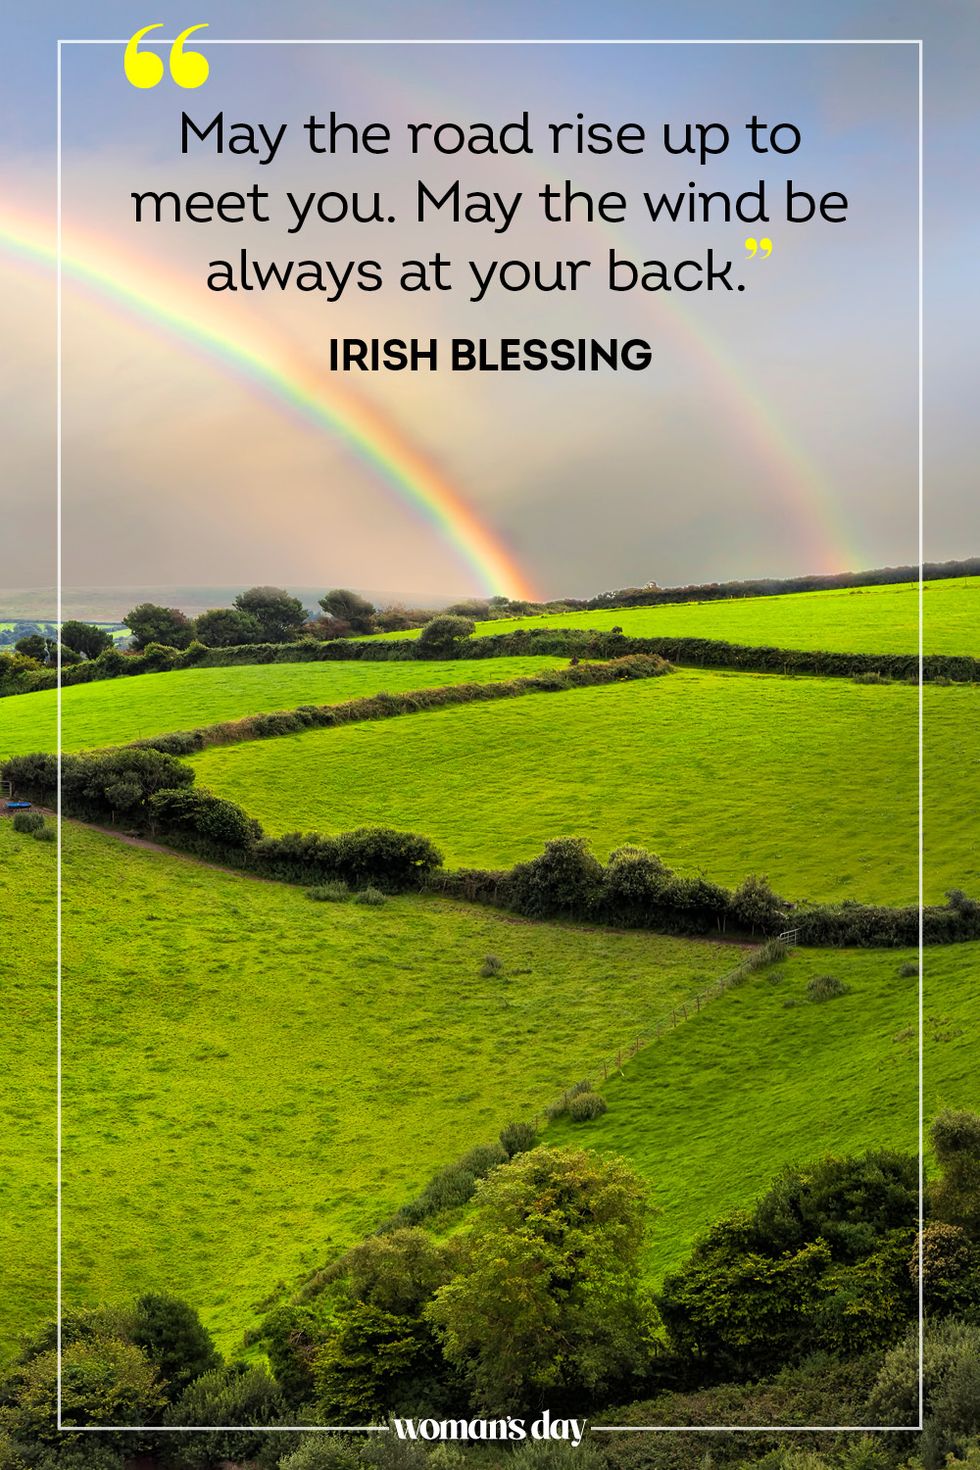 st patrick's day quotes irish blessing